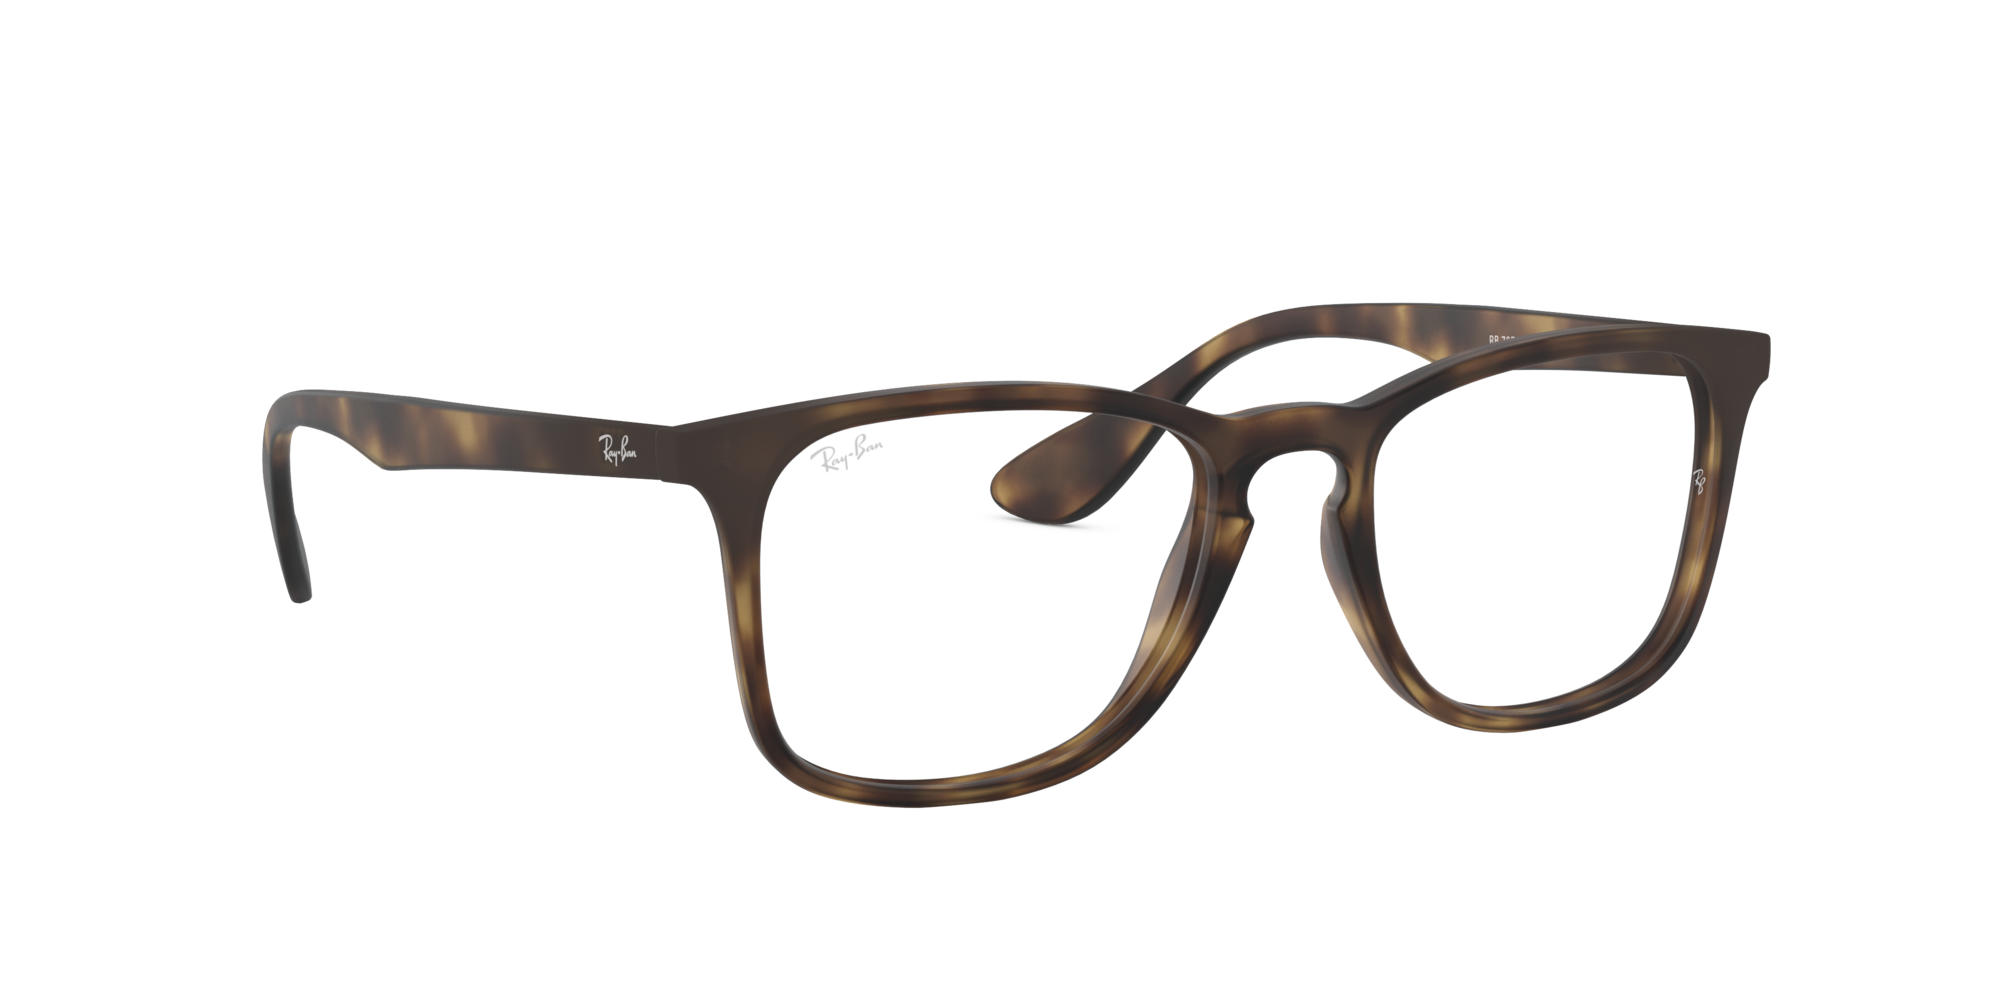 Angle_Right01 Ray-Ban RX 7074 Glasses Transparent / Tortoise Shell